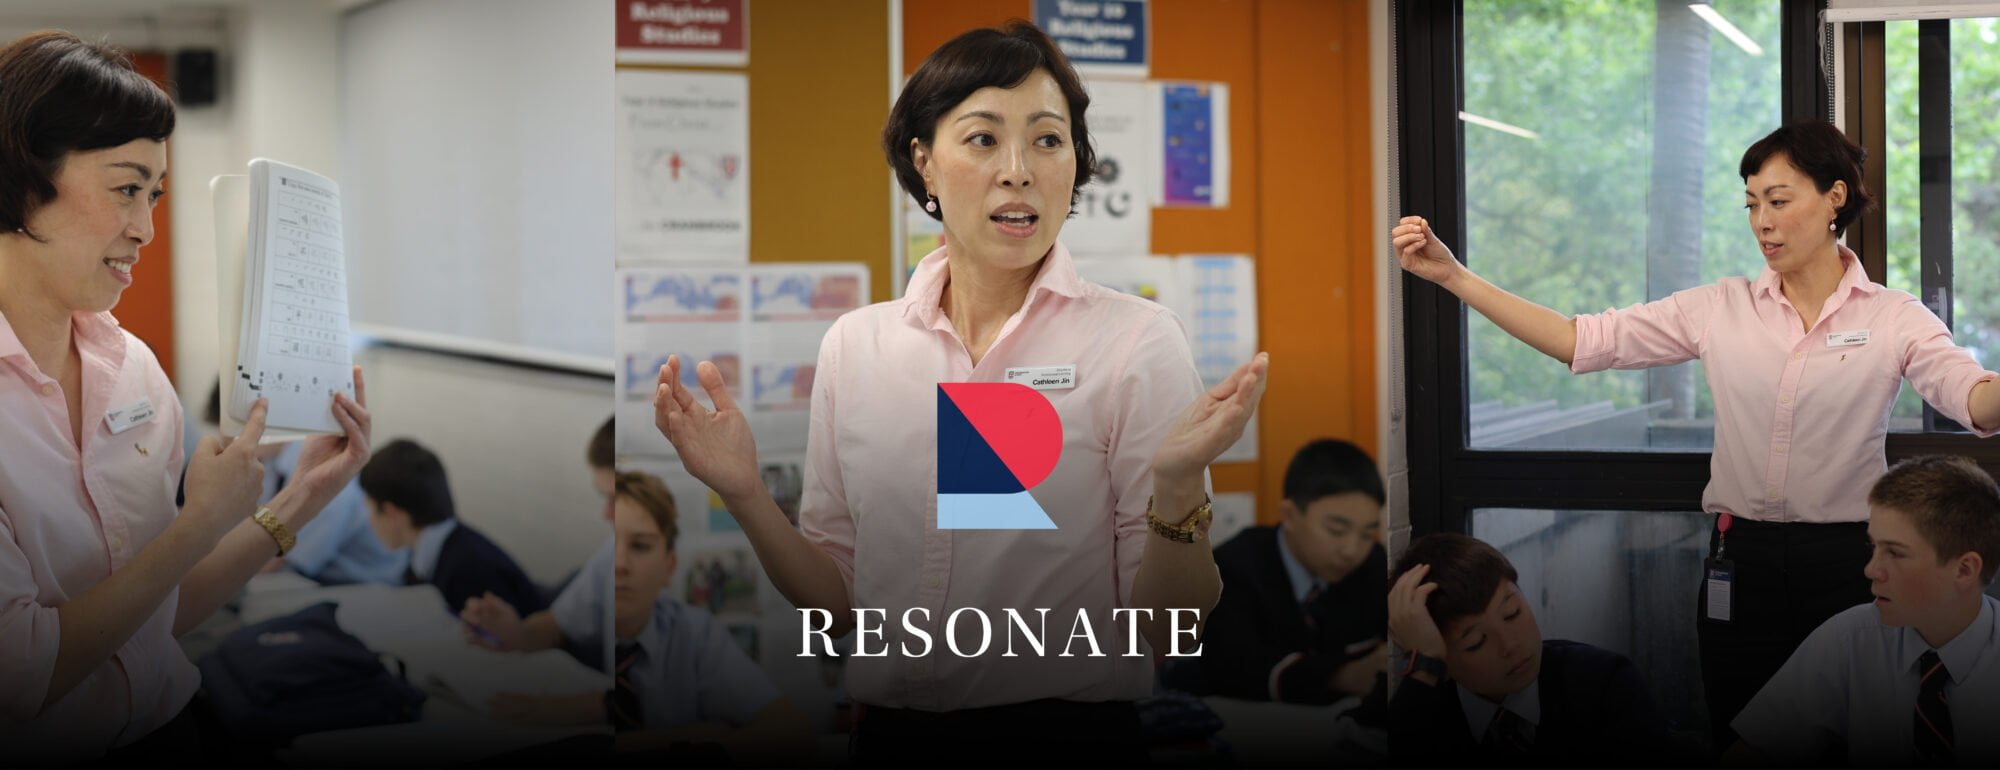 Resonate Series: Professional Learning